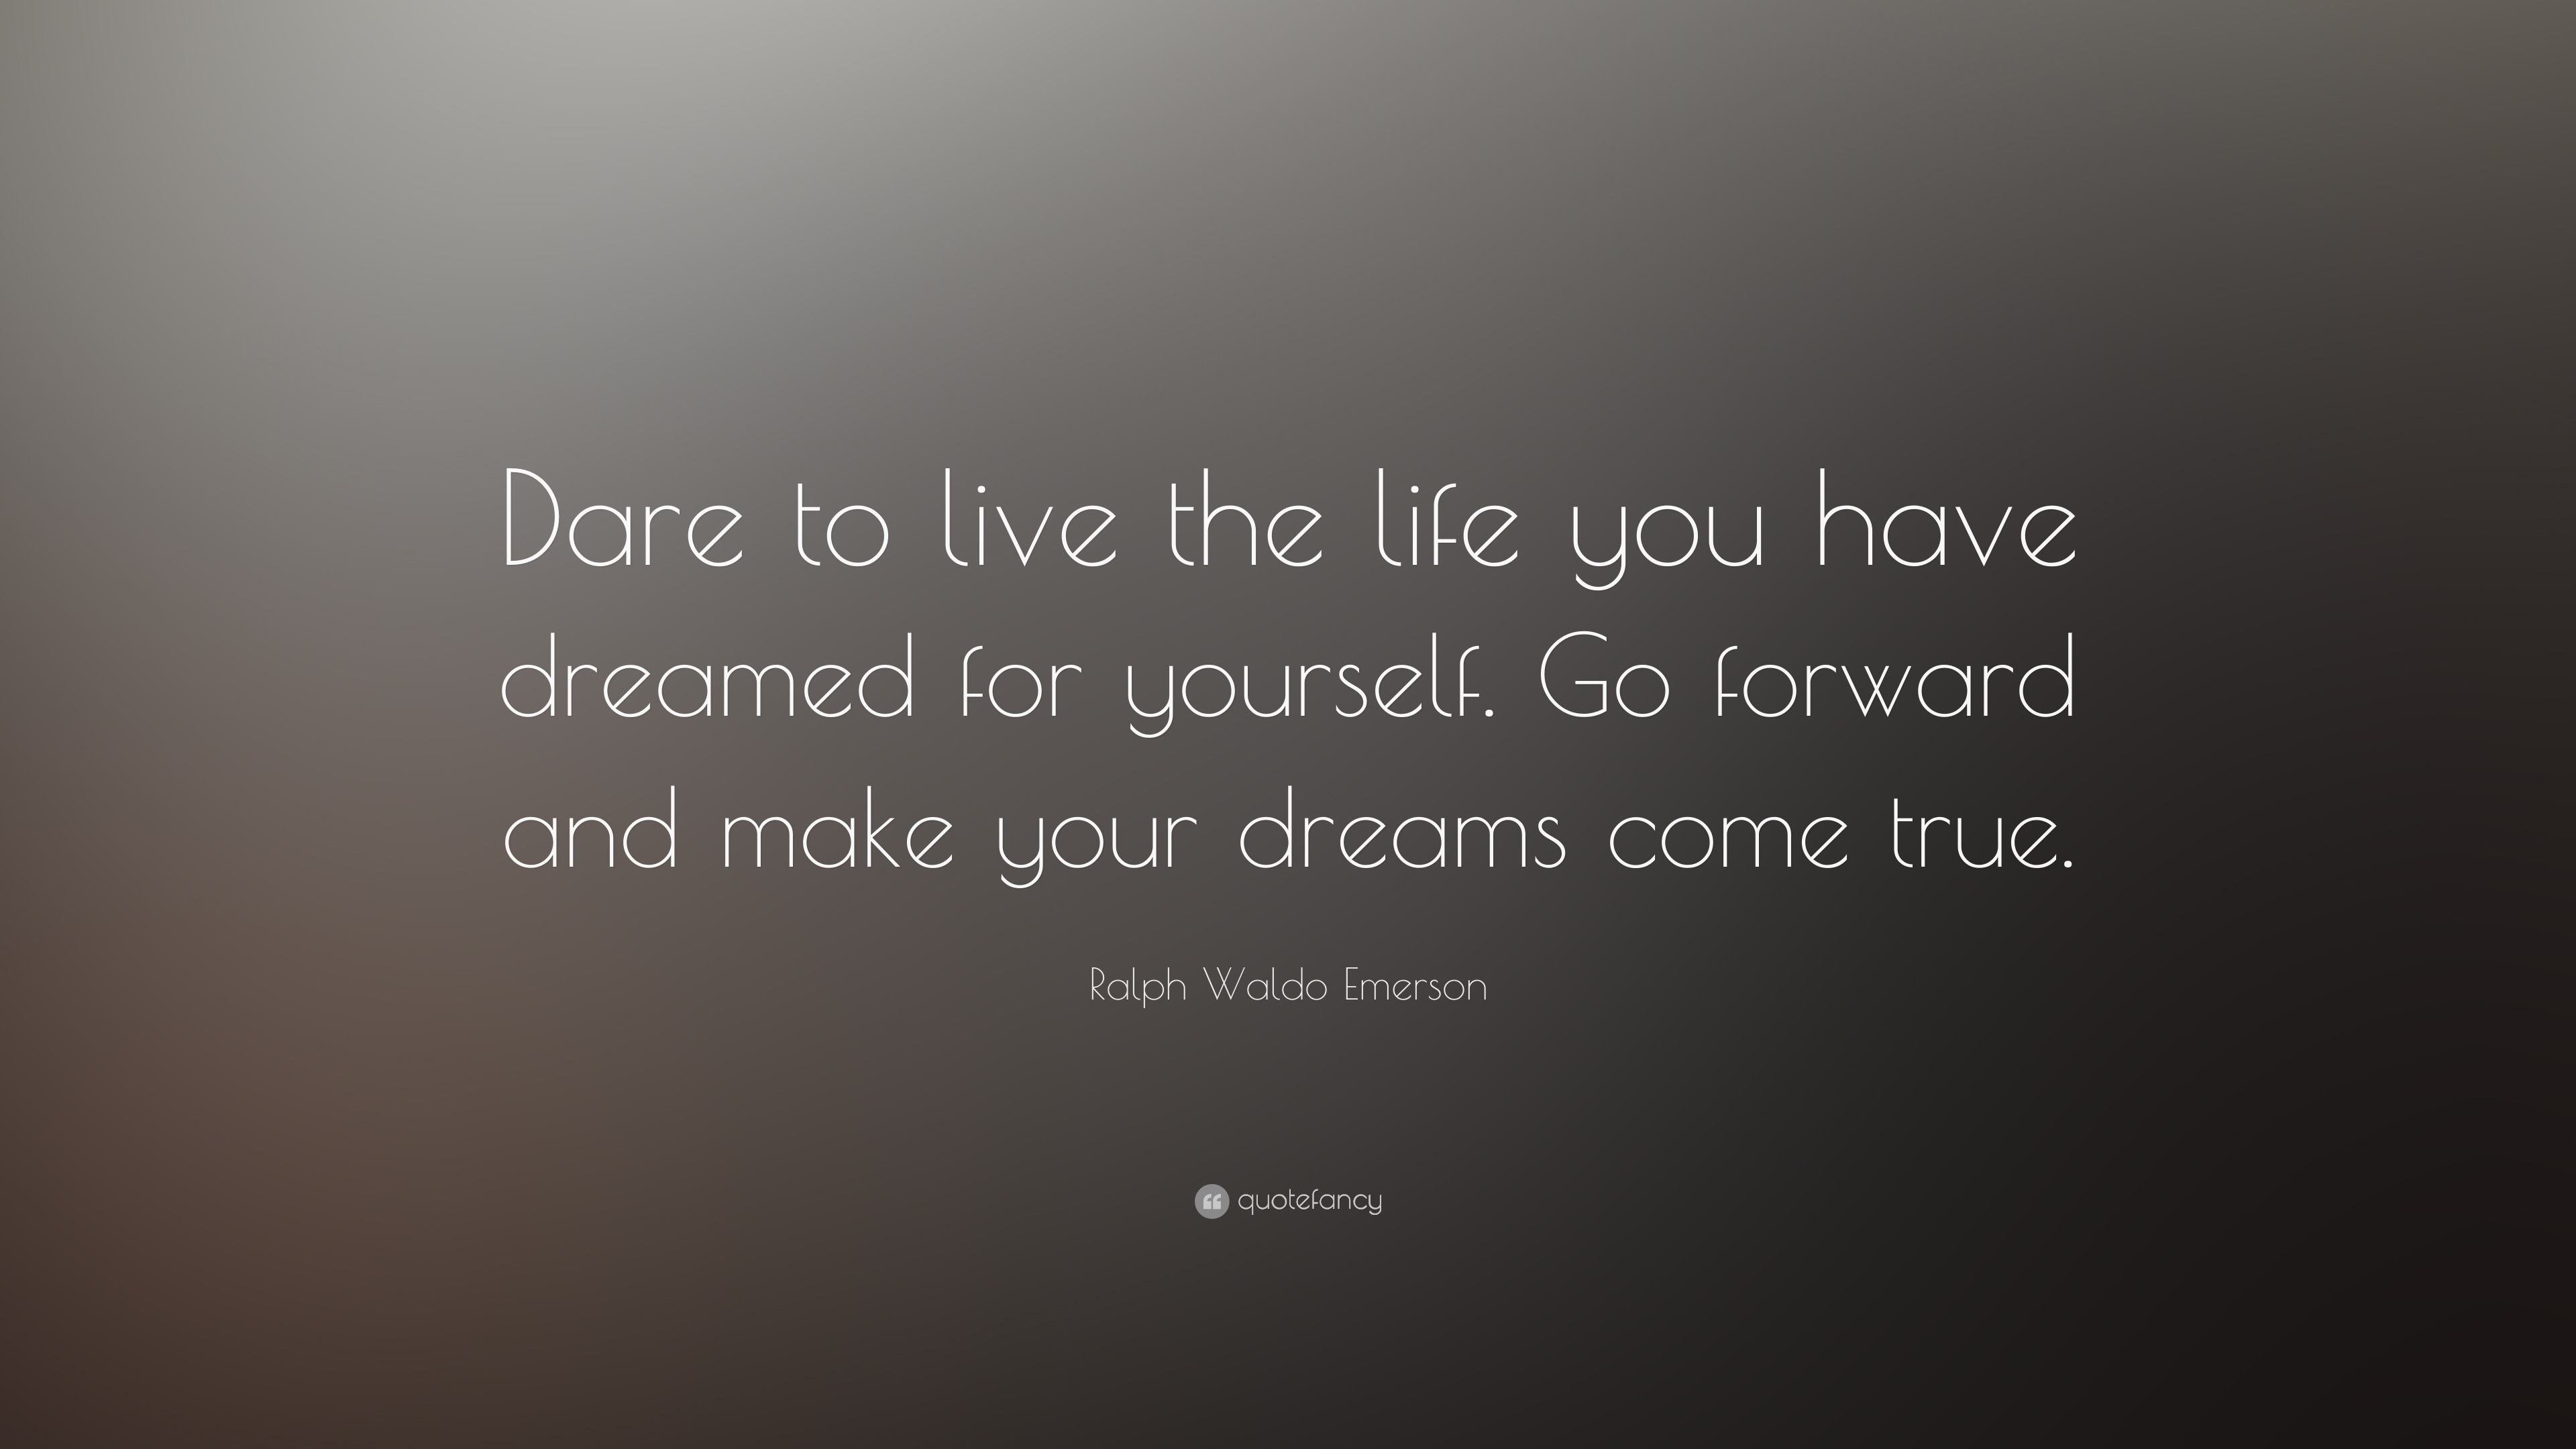 Ralph Waldo Emerson Quote “Dare to live the life you have dreamed for yourself